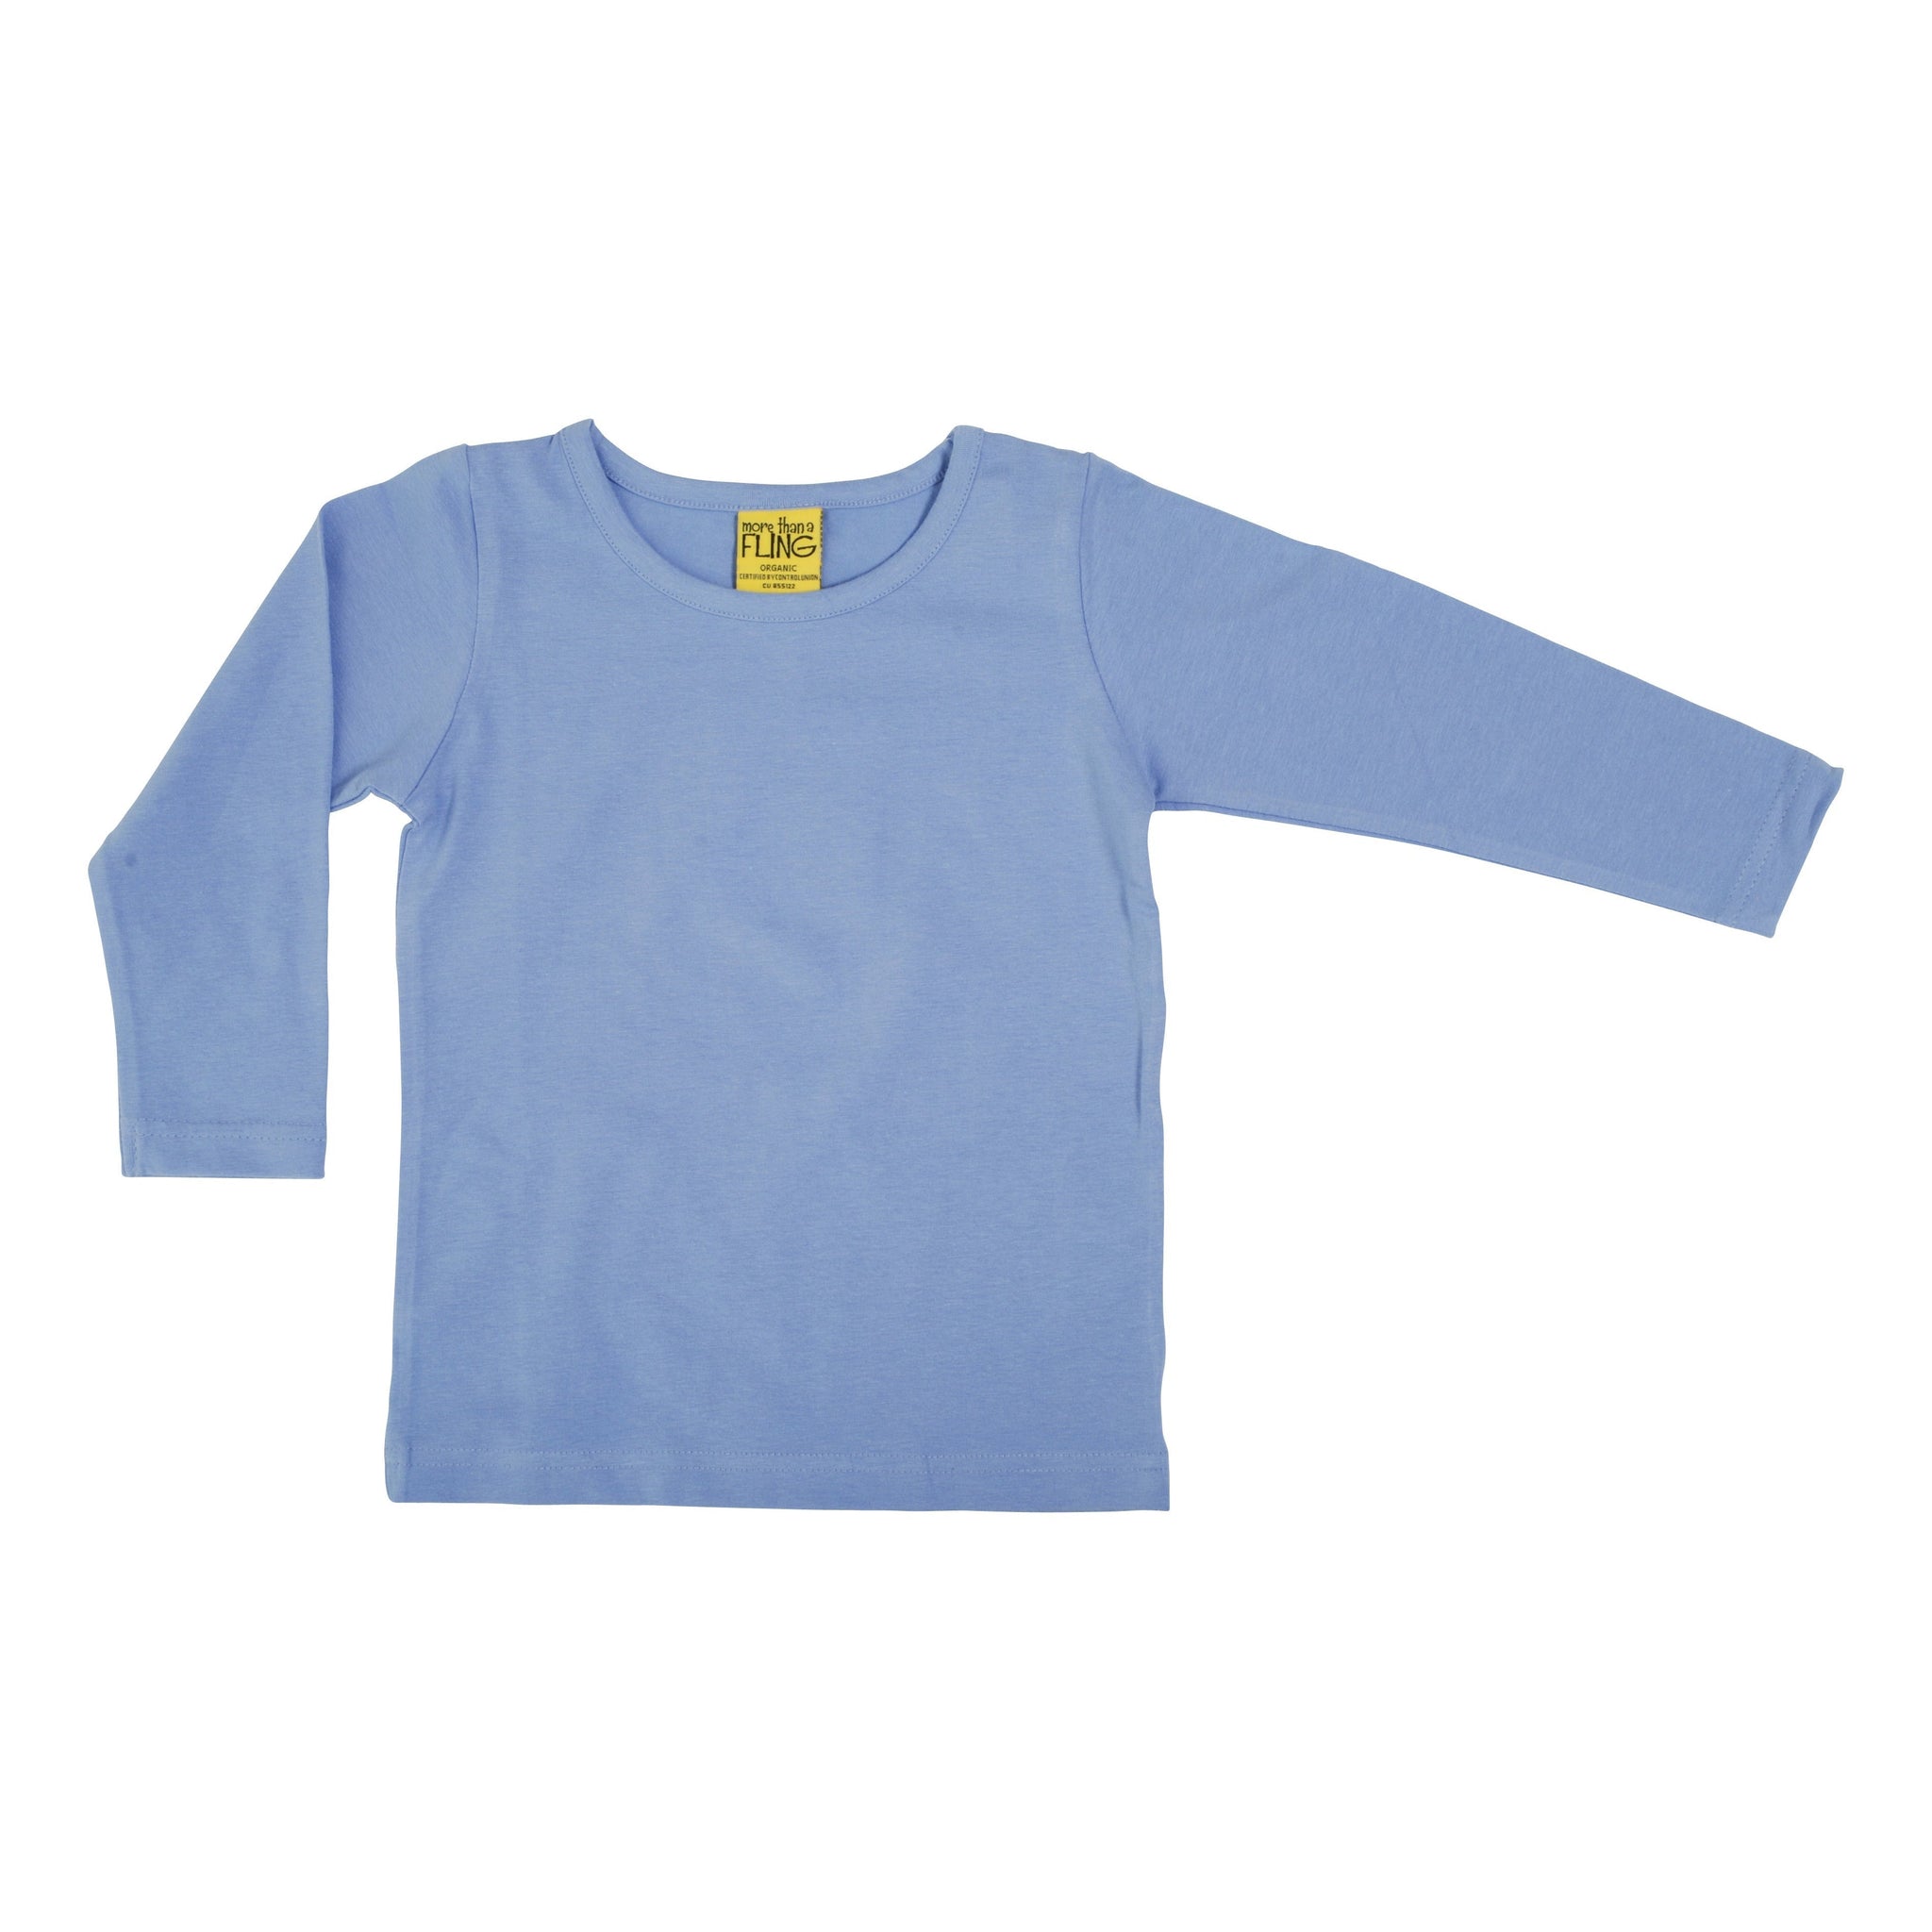 More Than A FLING - Easter Egg Long Sleeved Top (1-2 Years)